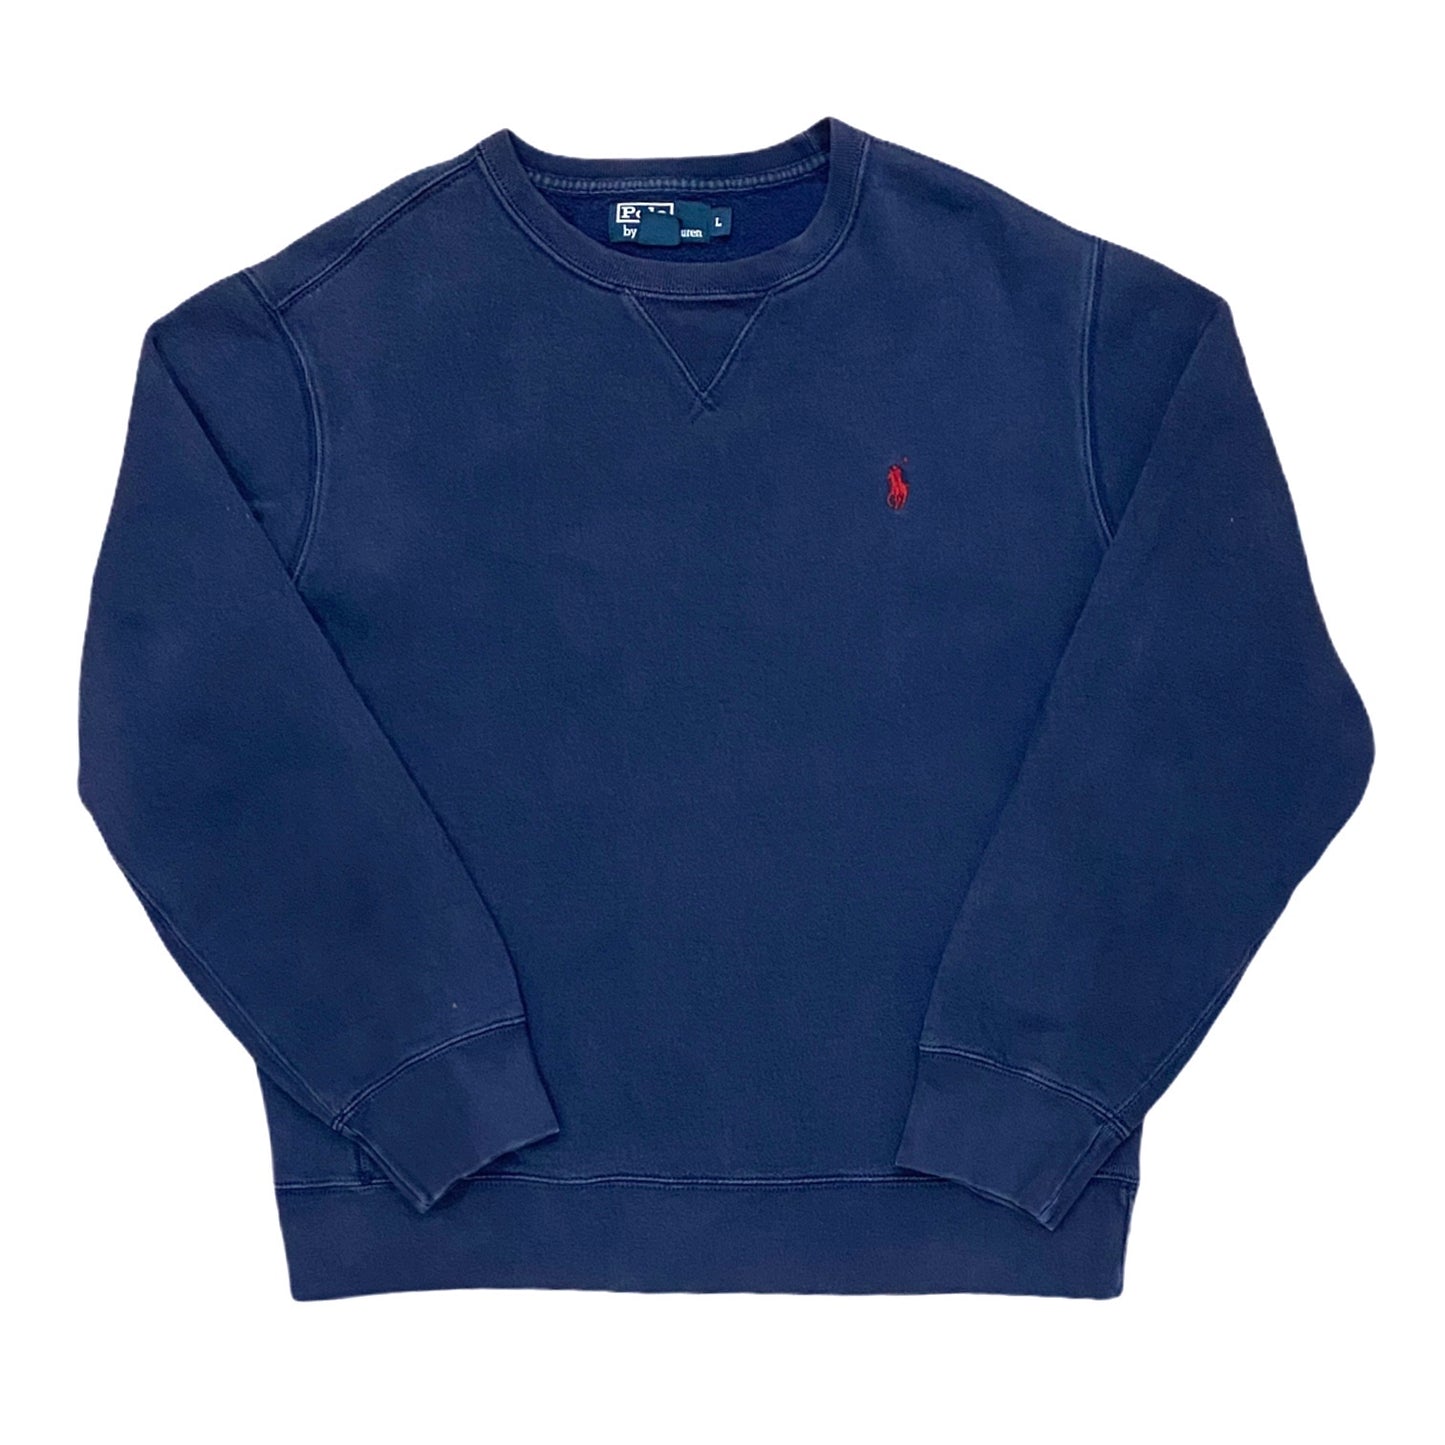 Polo Ralph Lauren embroidered sweater (S)